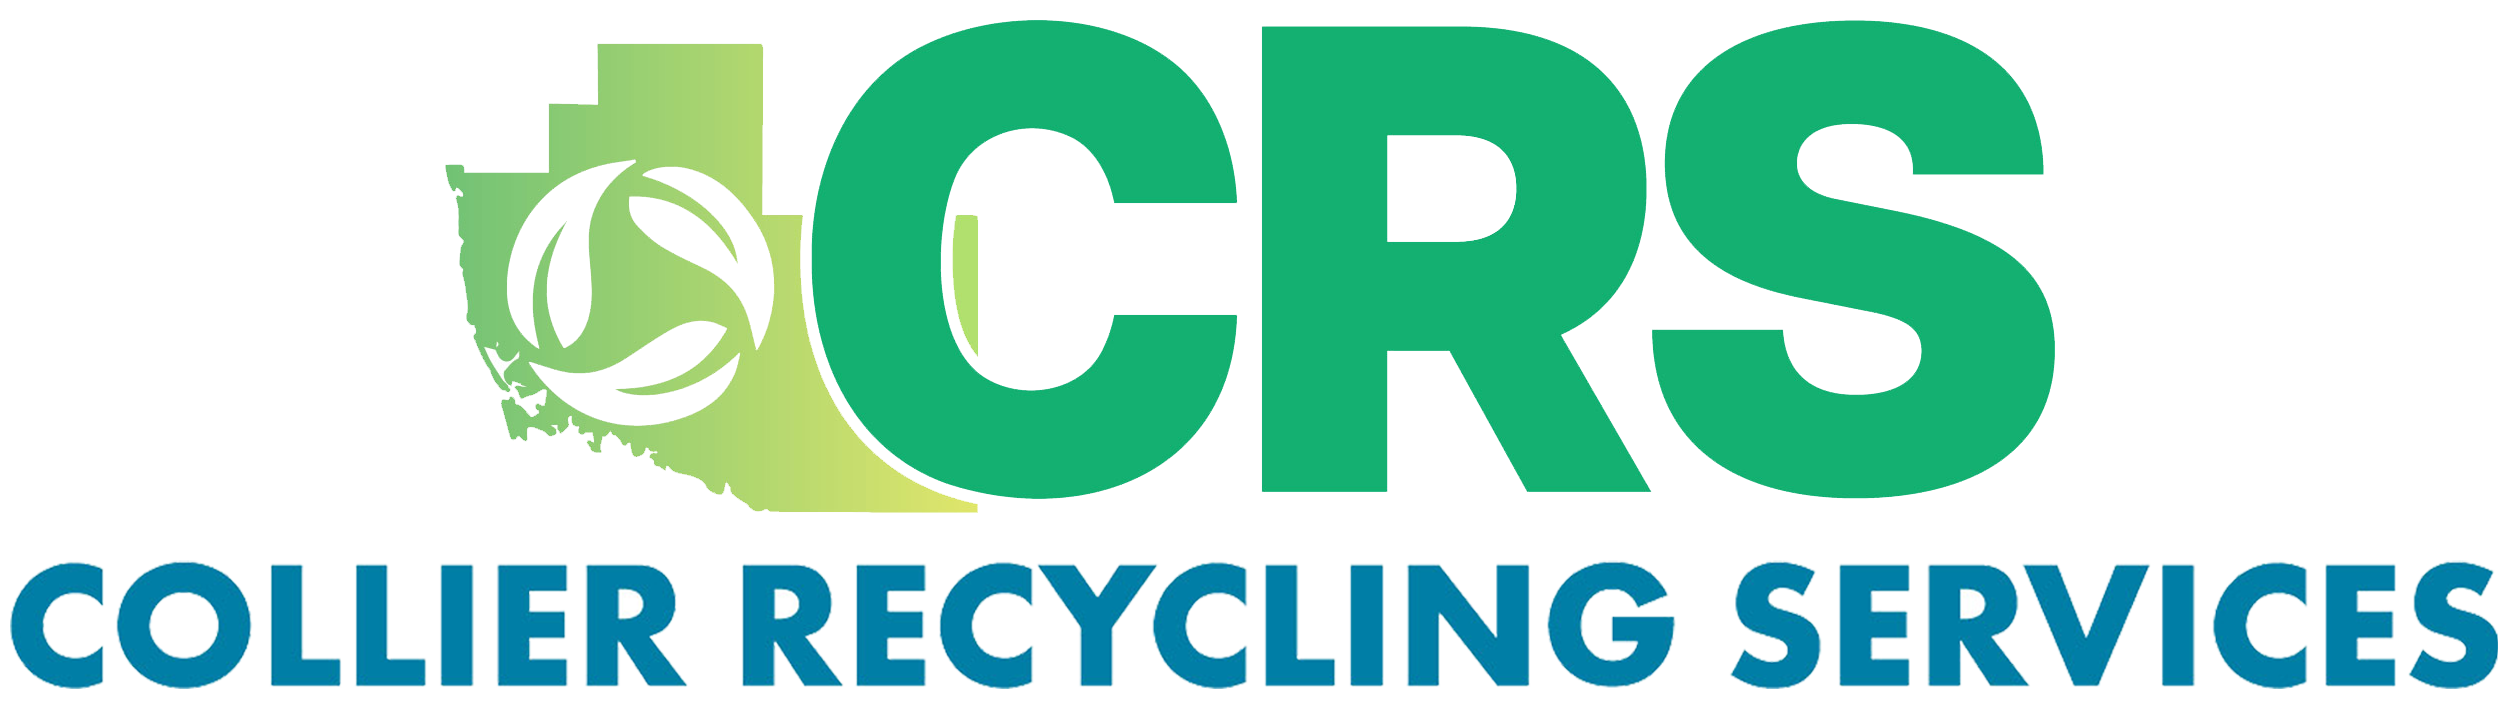 Collier Recycling Services